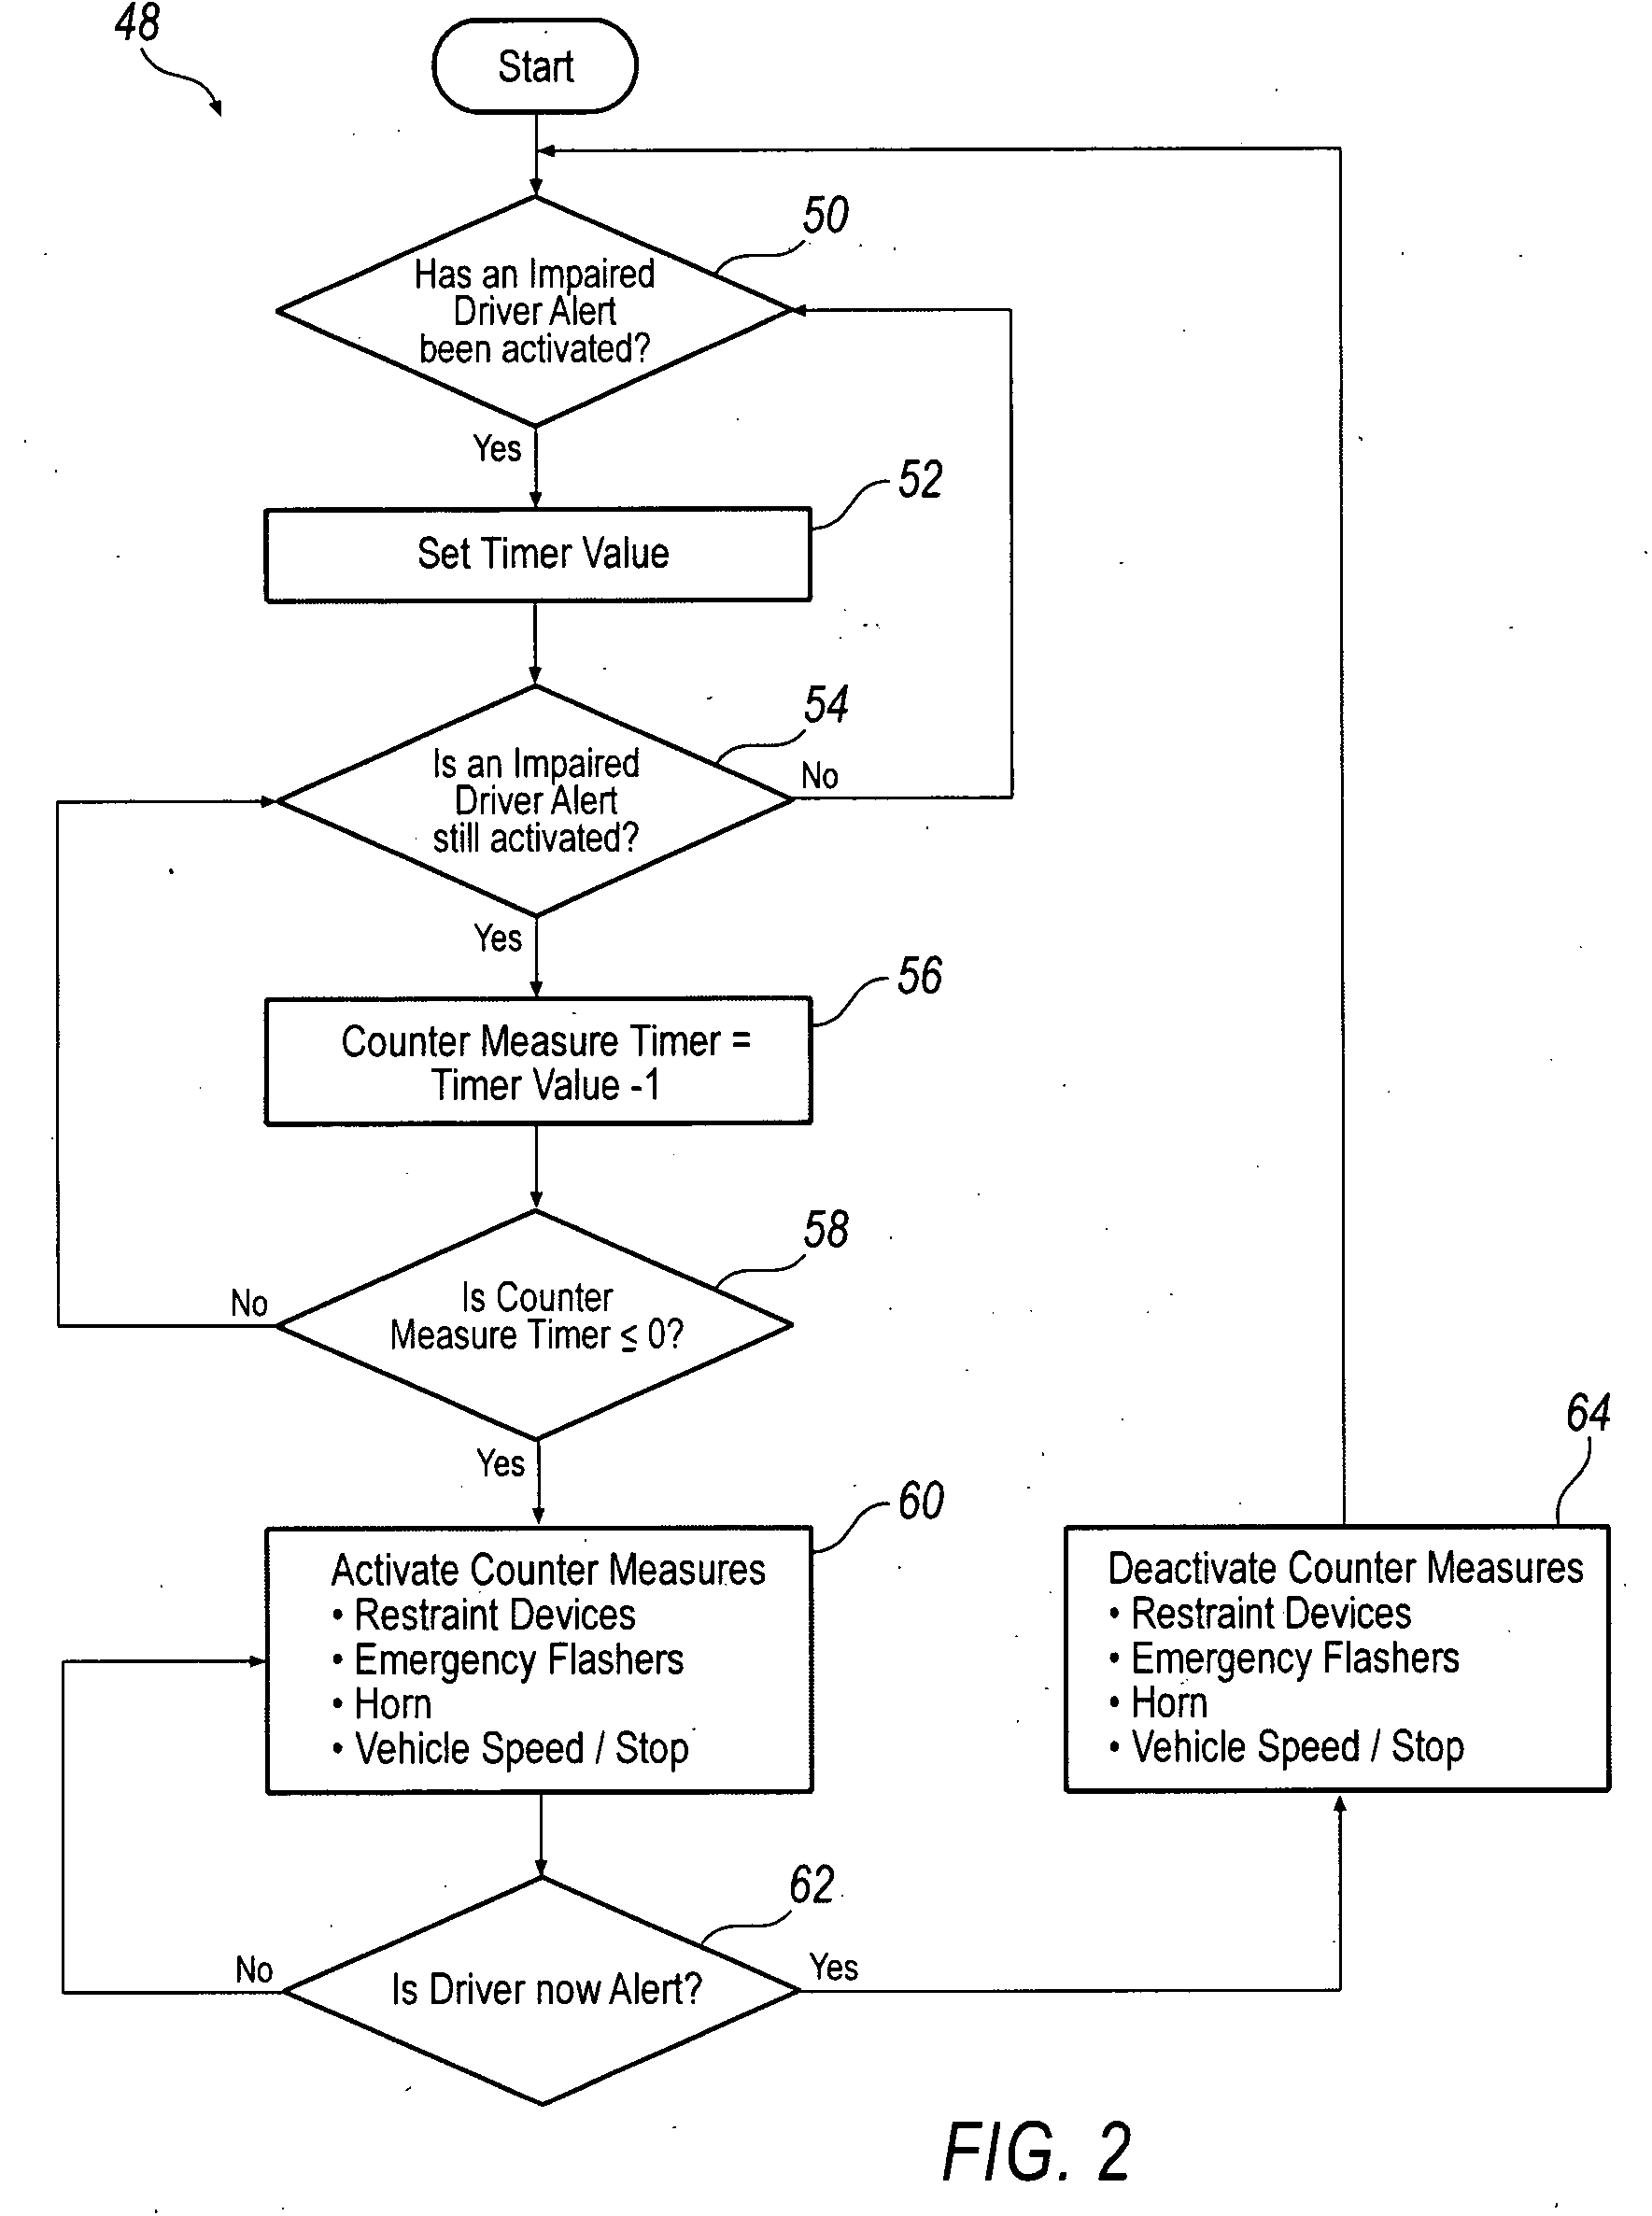 System and method for implementing active safety counter measures for an impaired driver